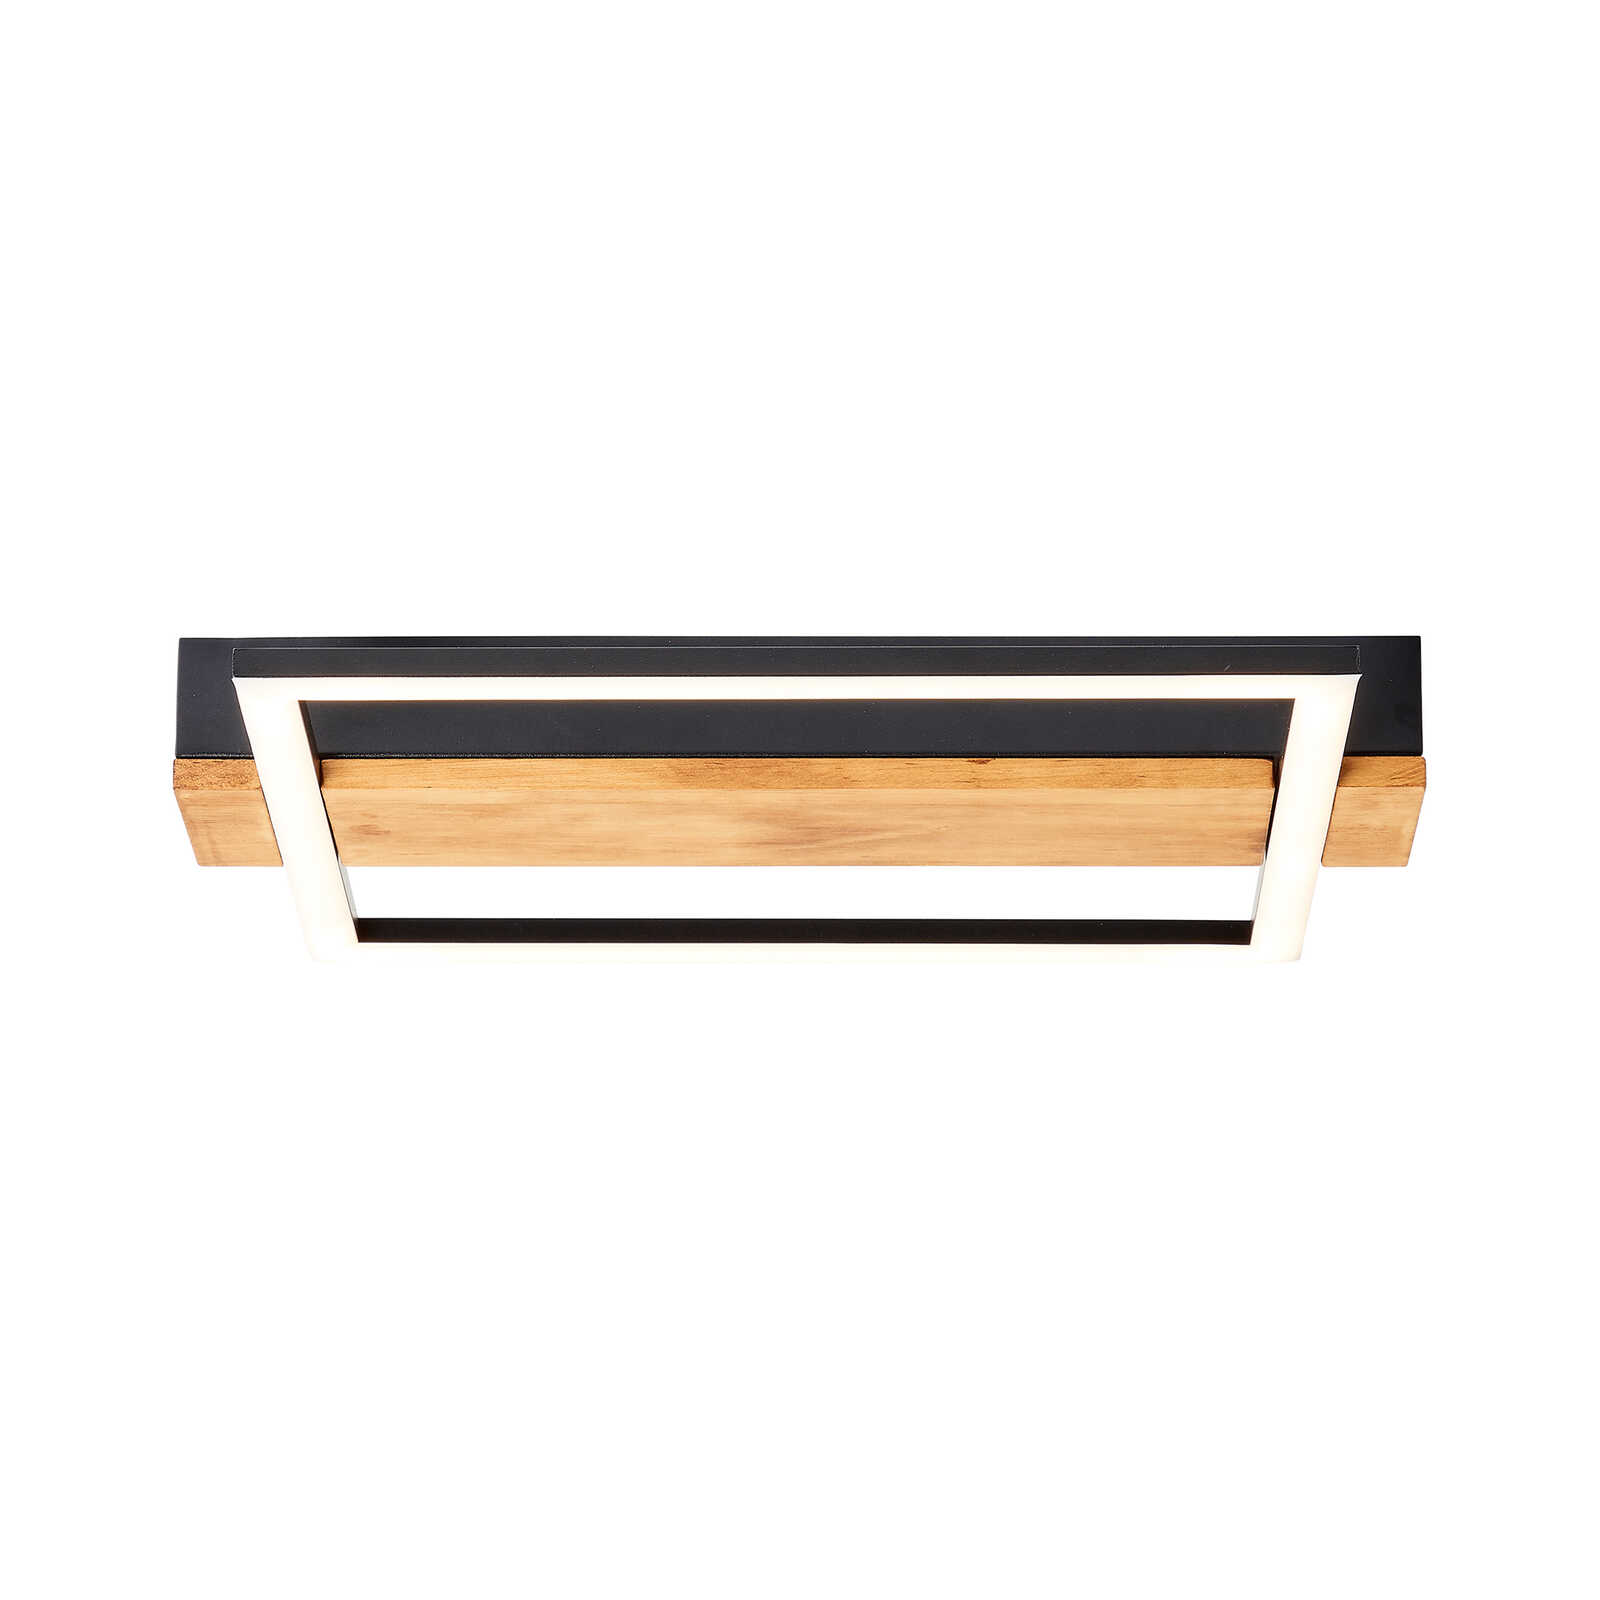 Wooden ceiling light - Layla 1 - Brown
